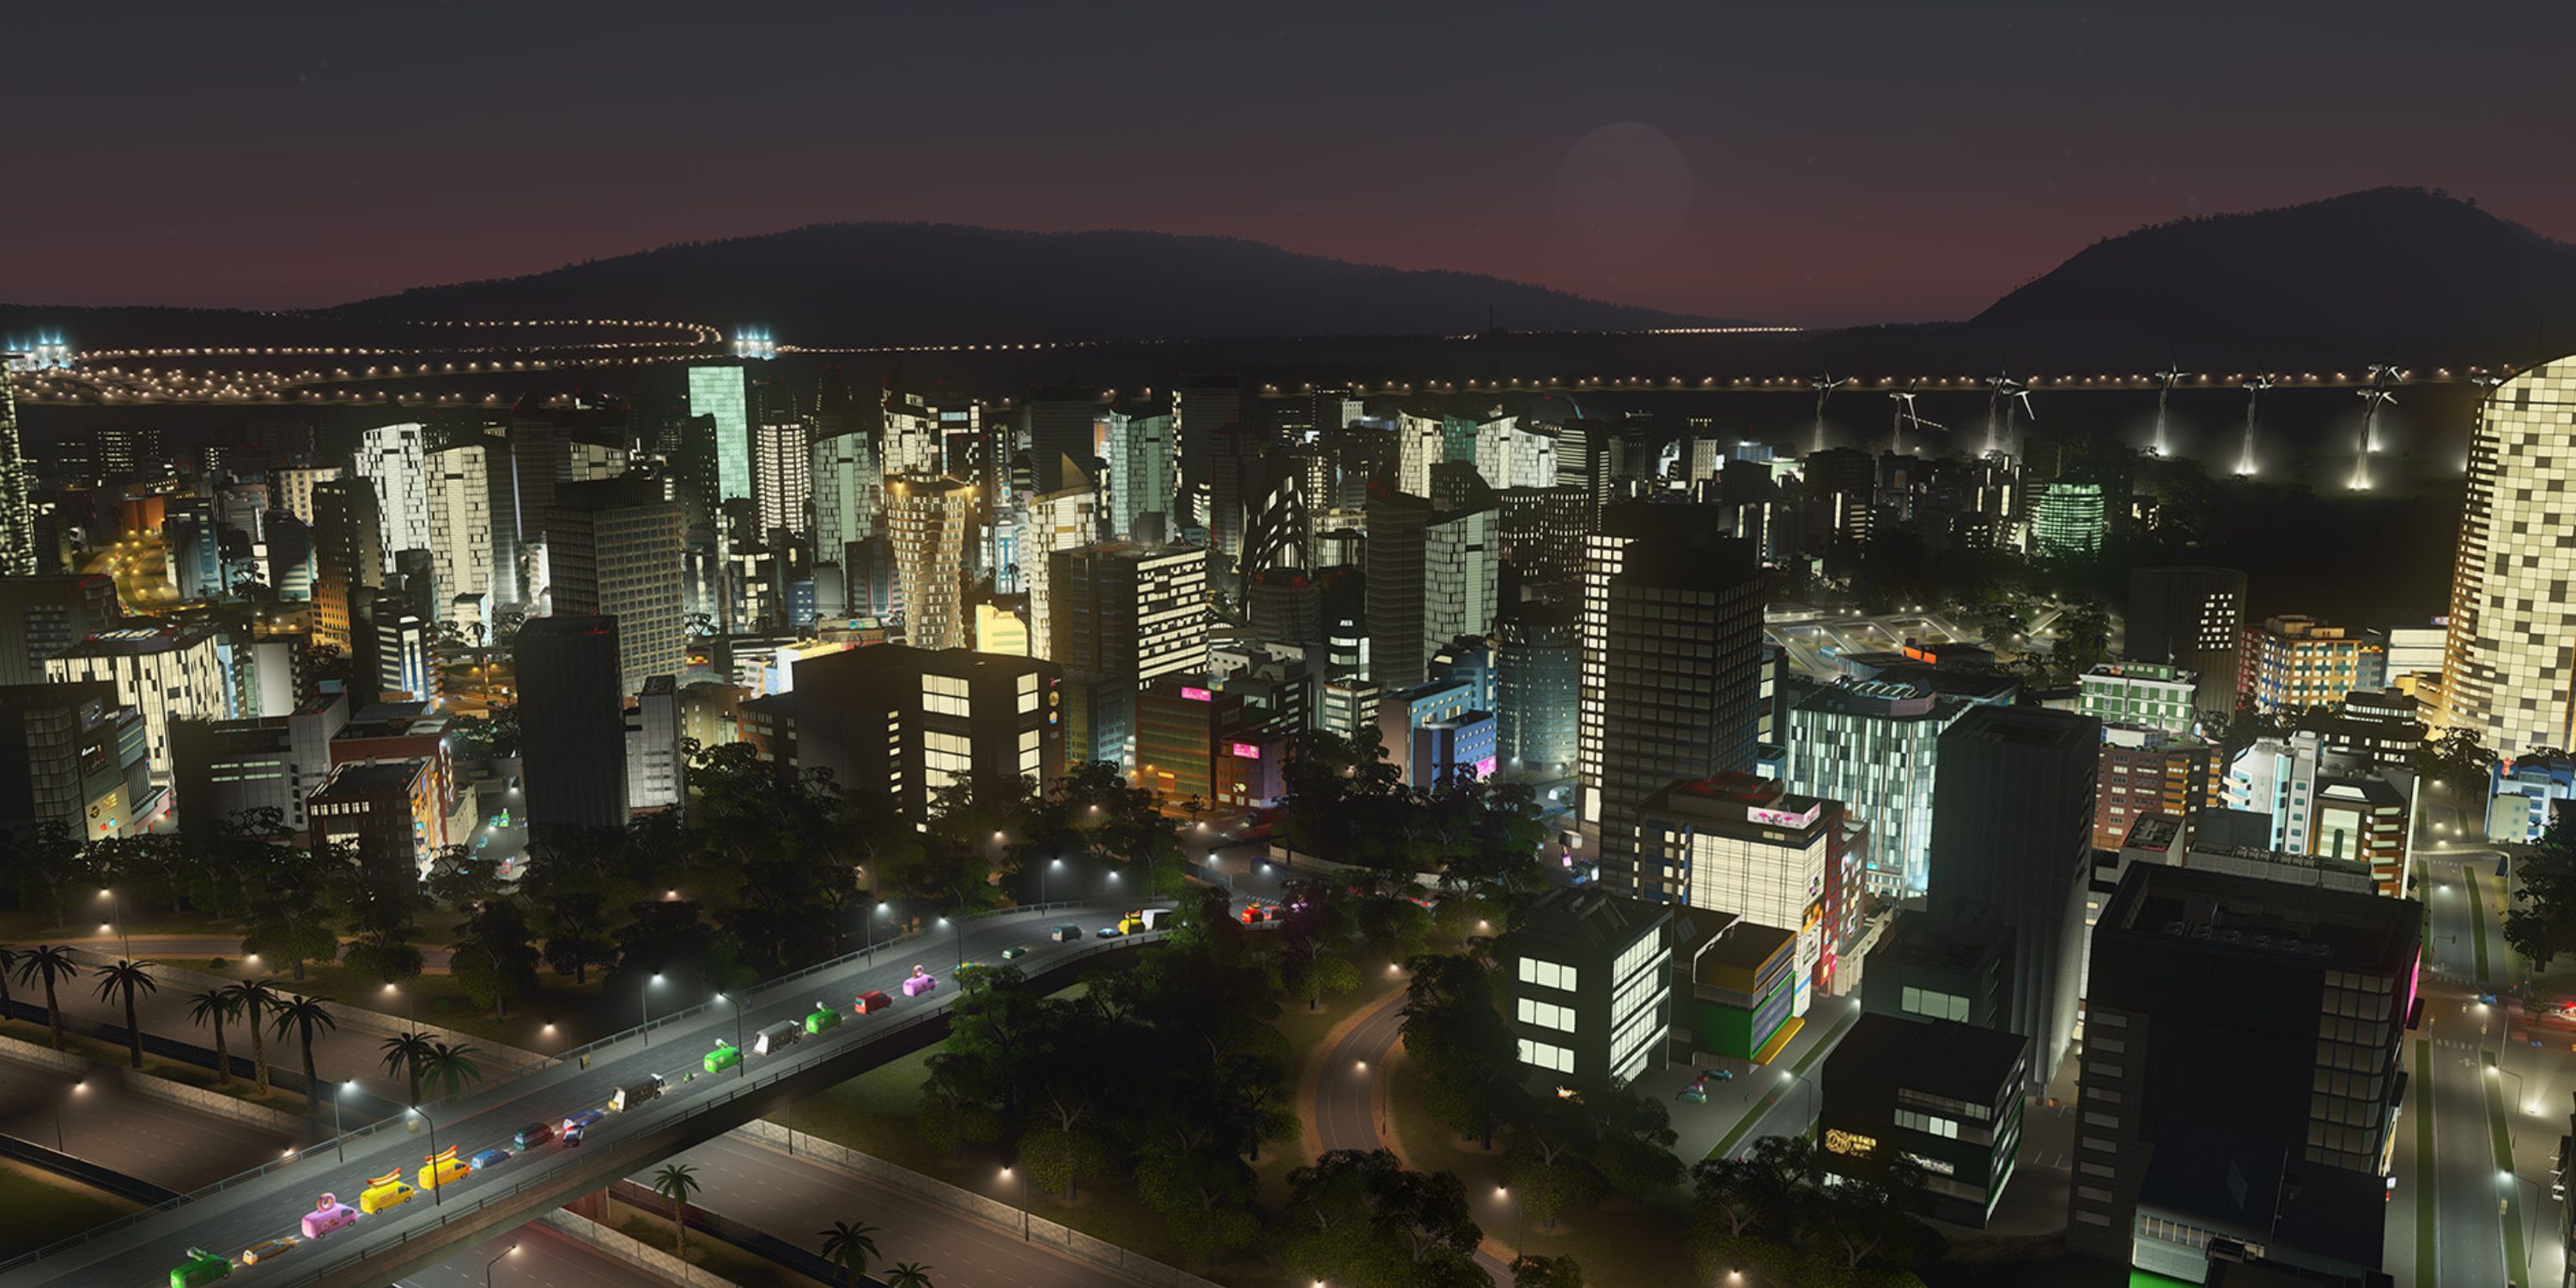 Cities: Skylines has a day/night cycle that effects how things run, causing the player to plan things differently.